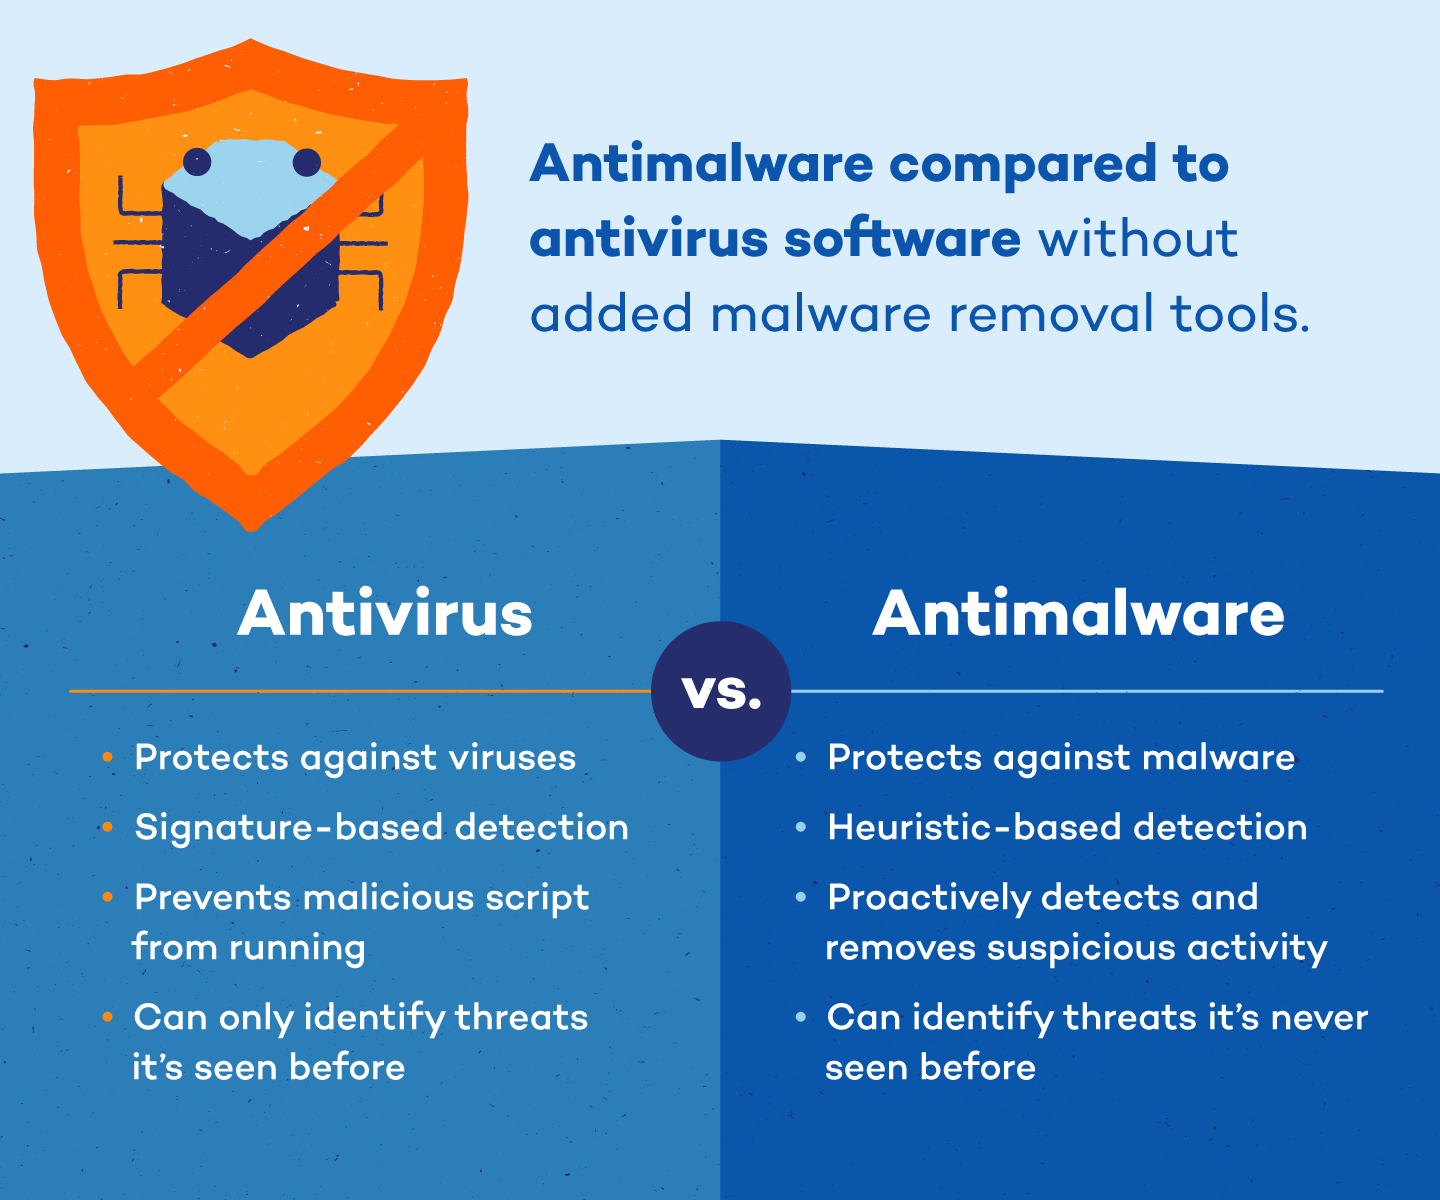 Install a reliable antivirus or anti-malware program if you don't have one already.
Update the antivirus/anti-malware program to ensure it has the latest virus definitions.